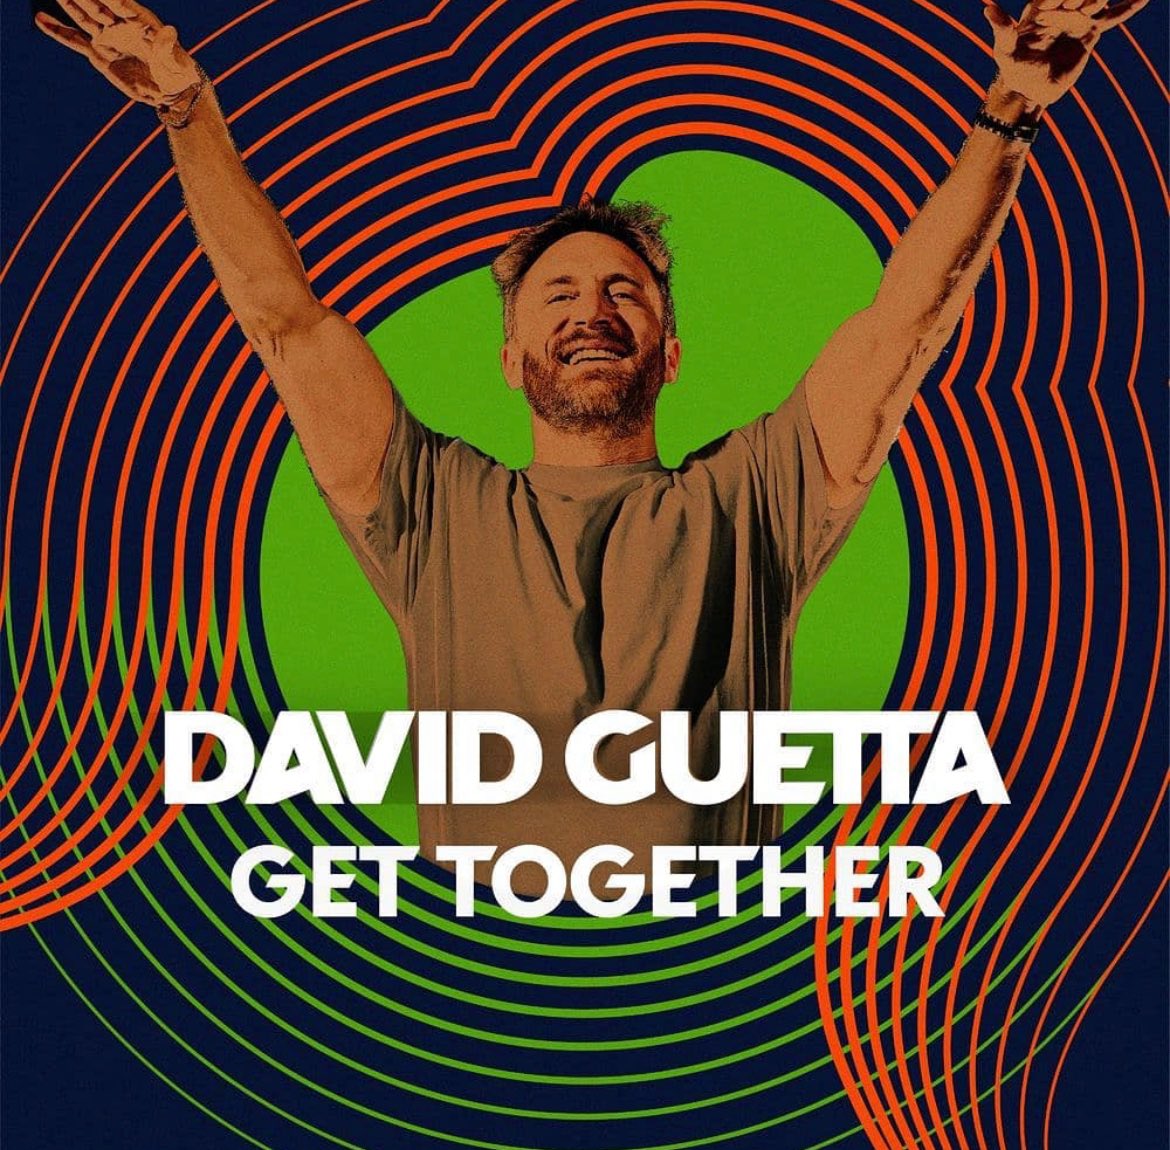 The young queen @ab_keen_ and I did a zoom session with the iconic @davidguetta during quarantine and now this is happening!!!! 🤯😻🙏🏼🍾🙌🏼🚀 thank you so much to everybody who made this possible!!! Eeeks! #GetTogether by David Guetta out now everywhere 💫